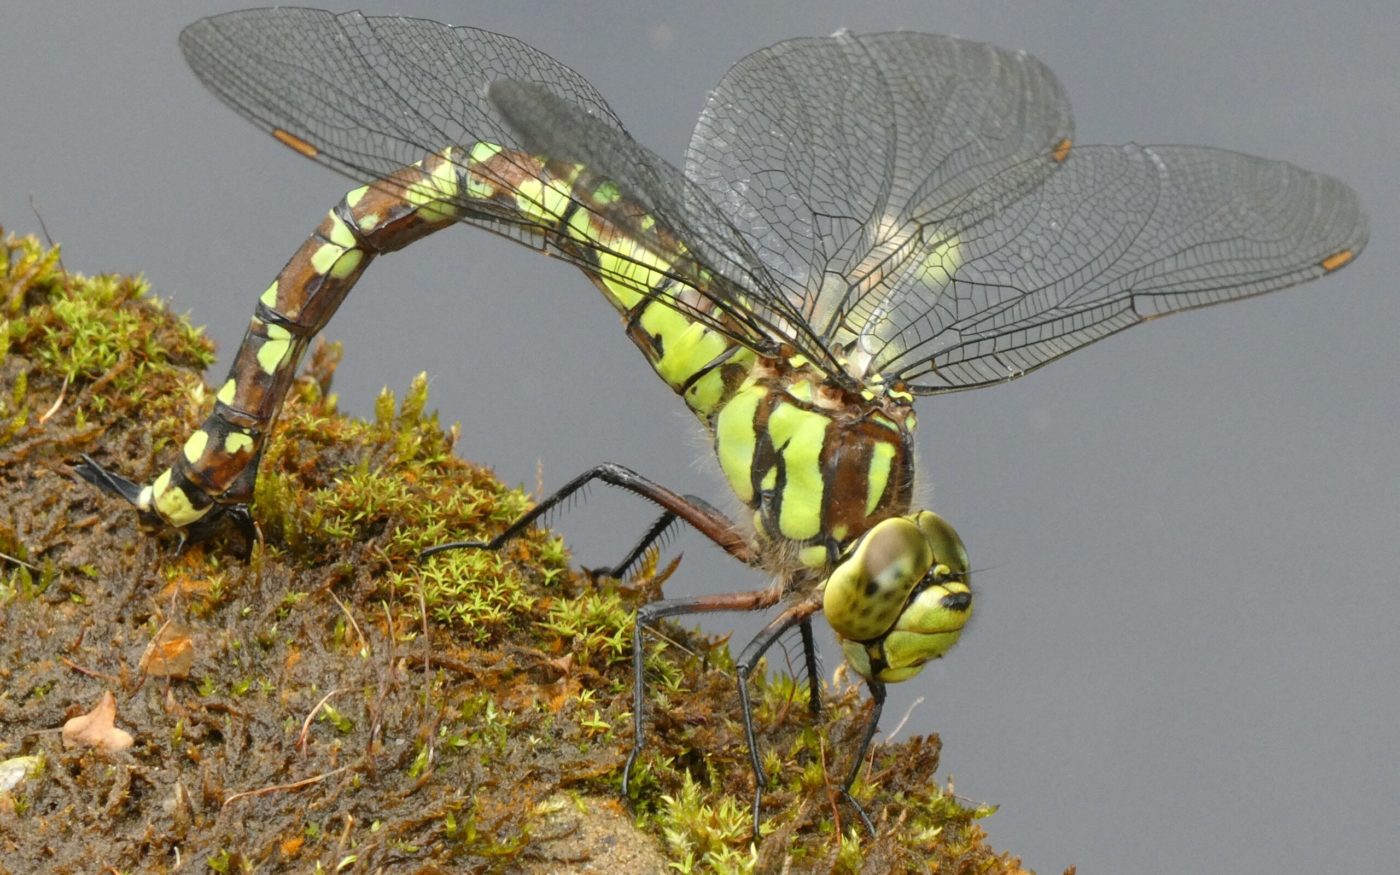 Female Southern Hawker dragonfly on a mossy branch